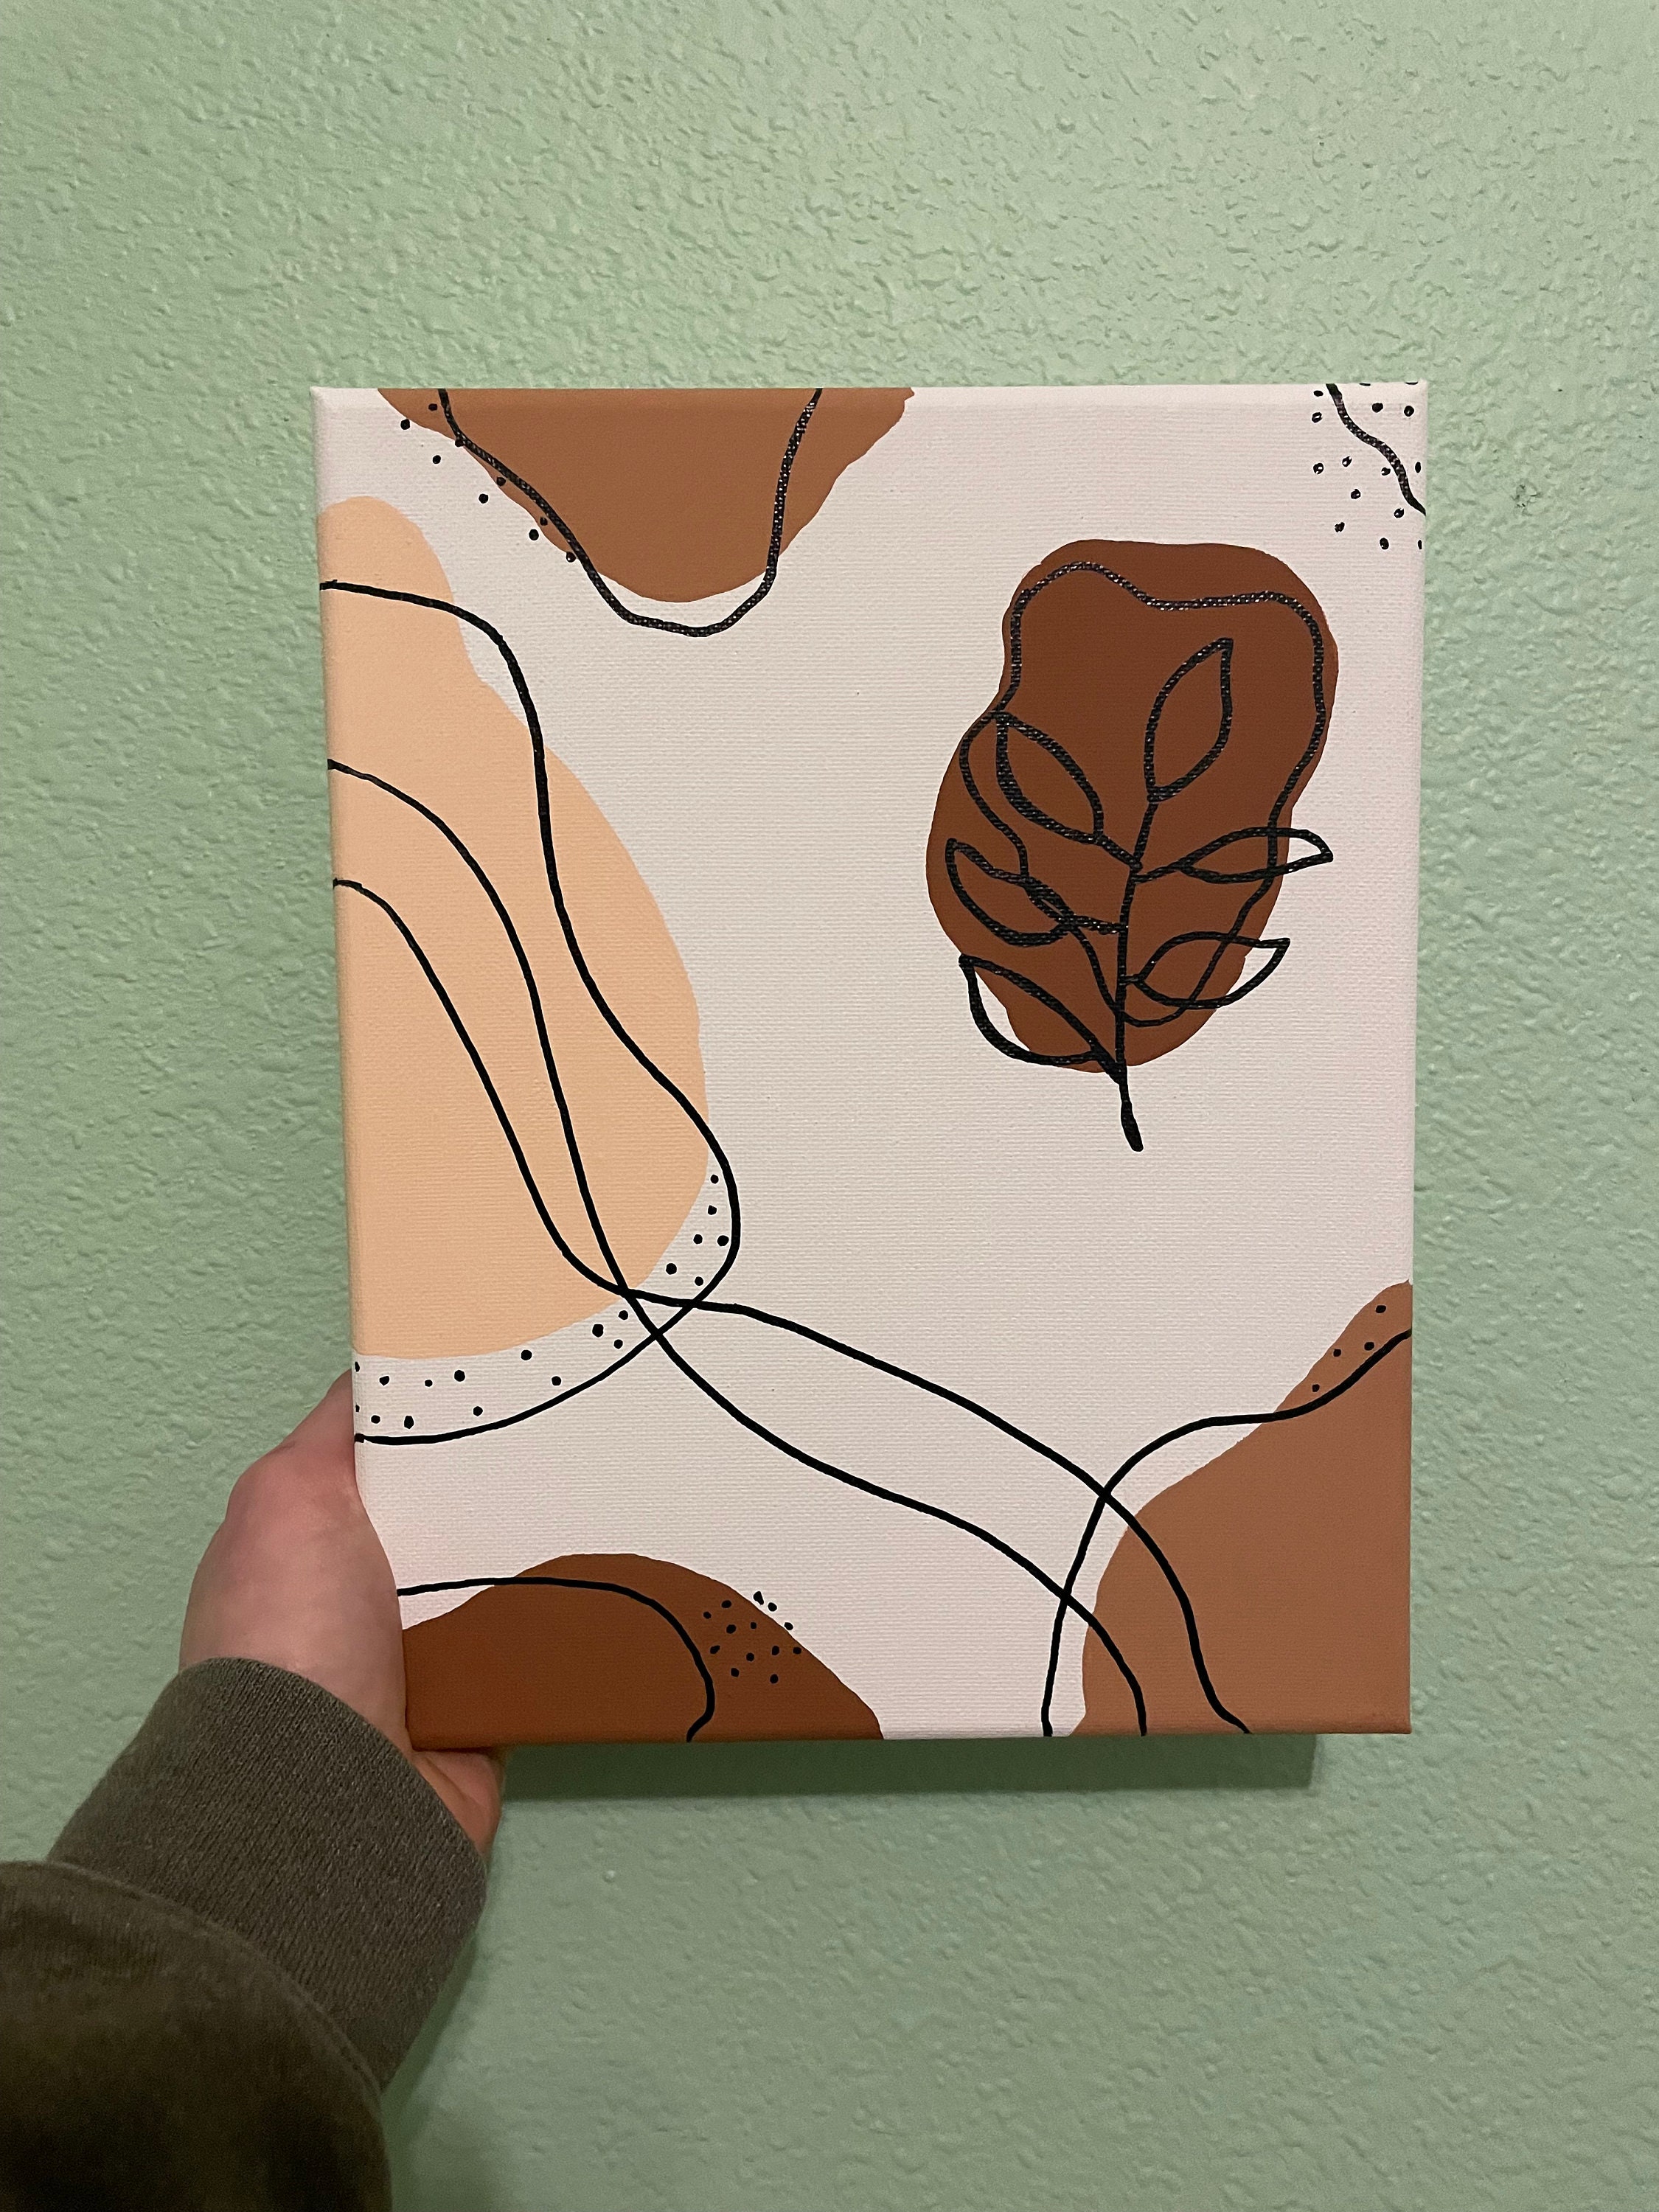 Aesthetic Painting On Canvas Etsy